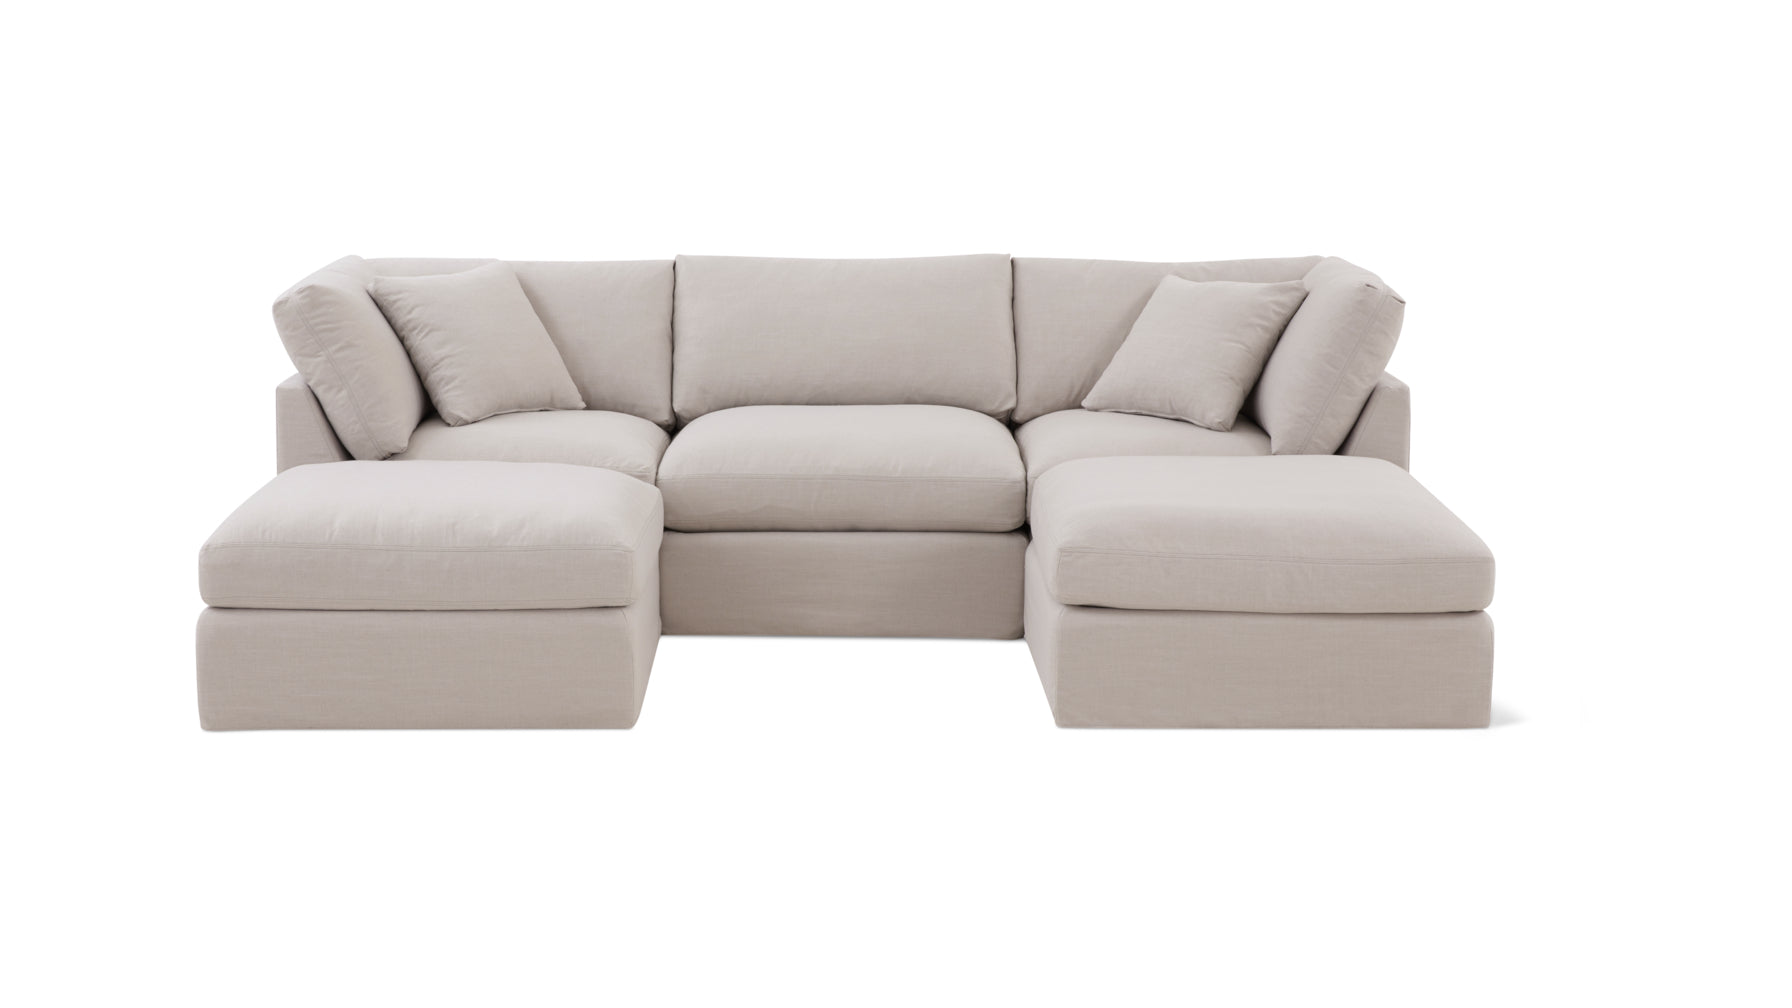 Get Together™ 5-Piece Modular U-Shaped Sectional, Standard, Clay - Image 1